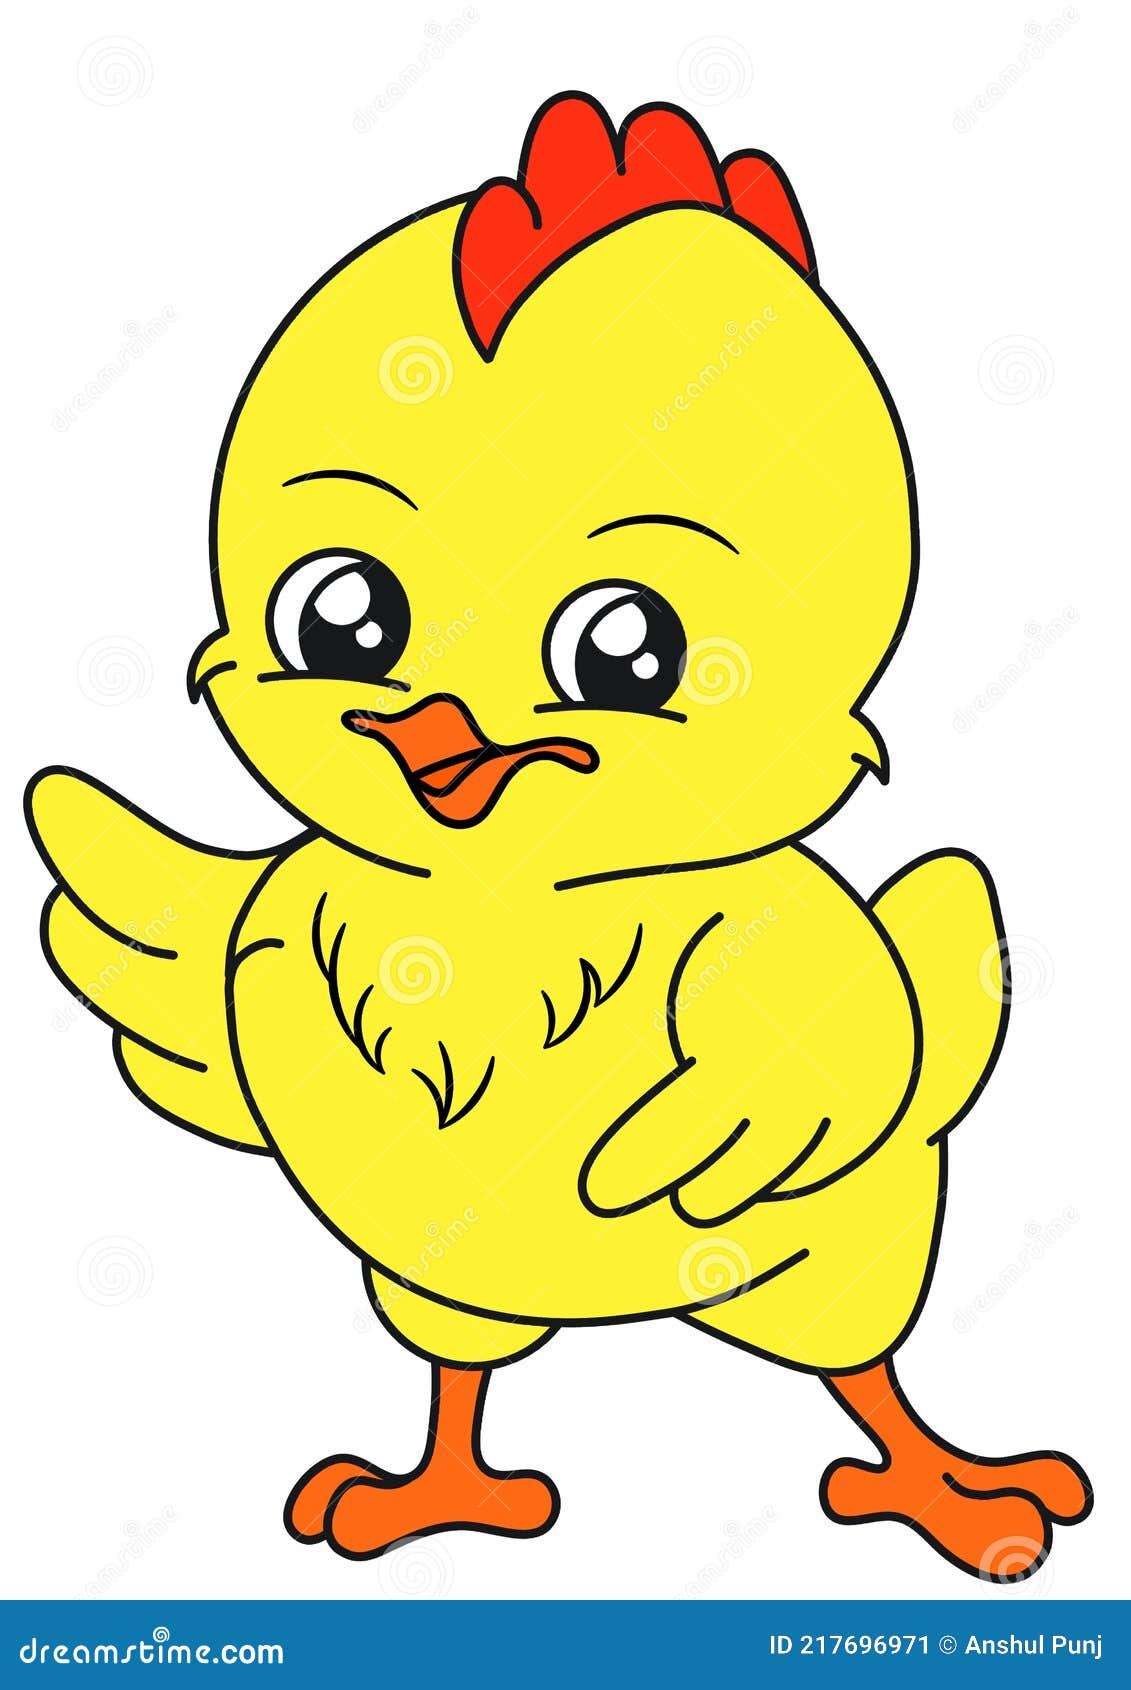 Coloring Page Illustration with Cute Cartoon Chicken Baby. Chick. Farm  Animals. Printable. Hand-drawn Image. Cartoon Drawing Stock Illustration -  Illustration of face, line: 217696971